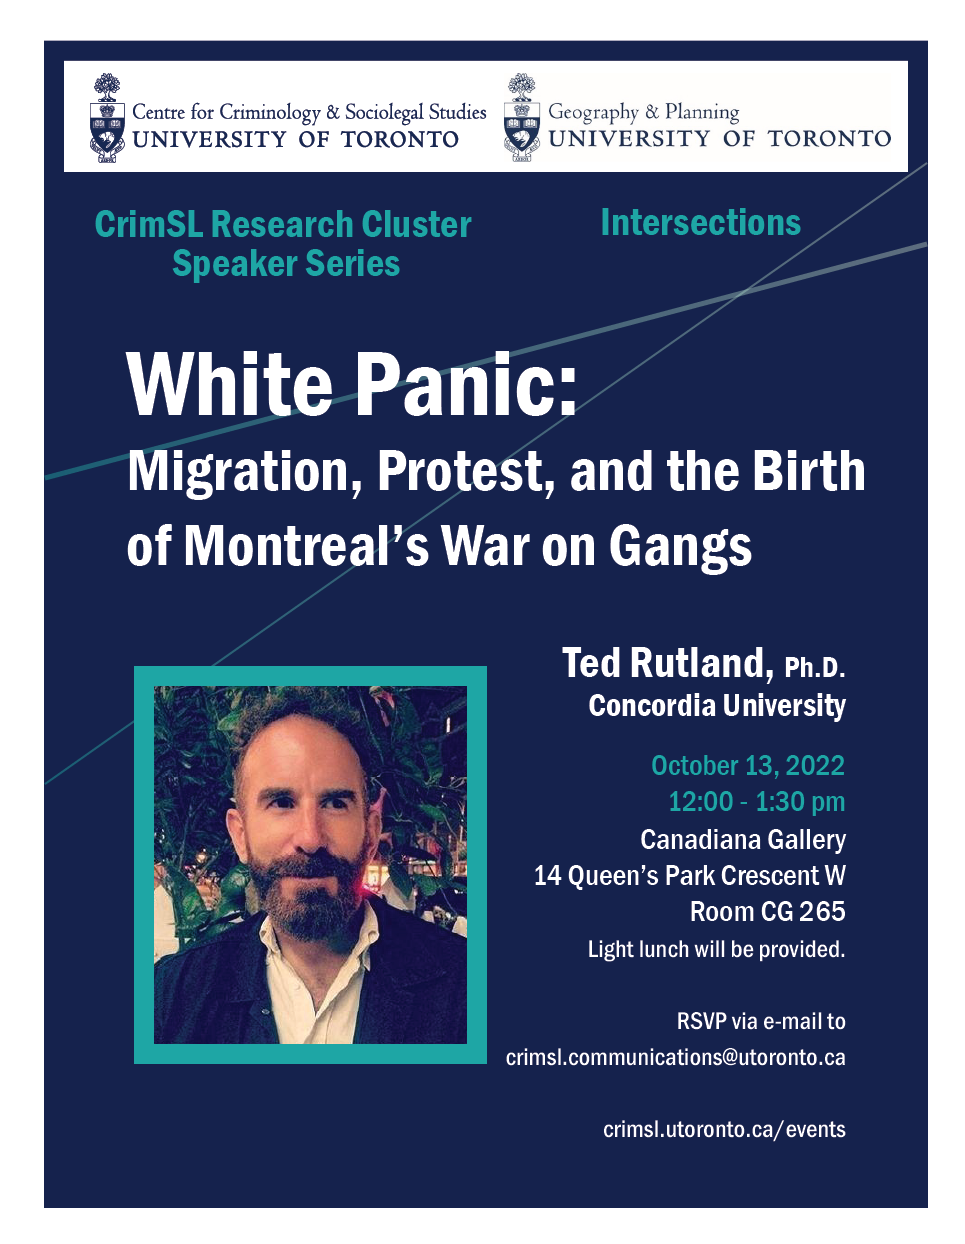 Poster for Ted Rutland lecture.